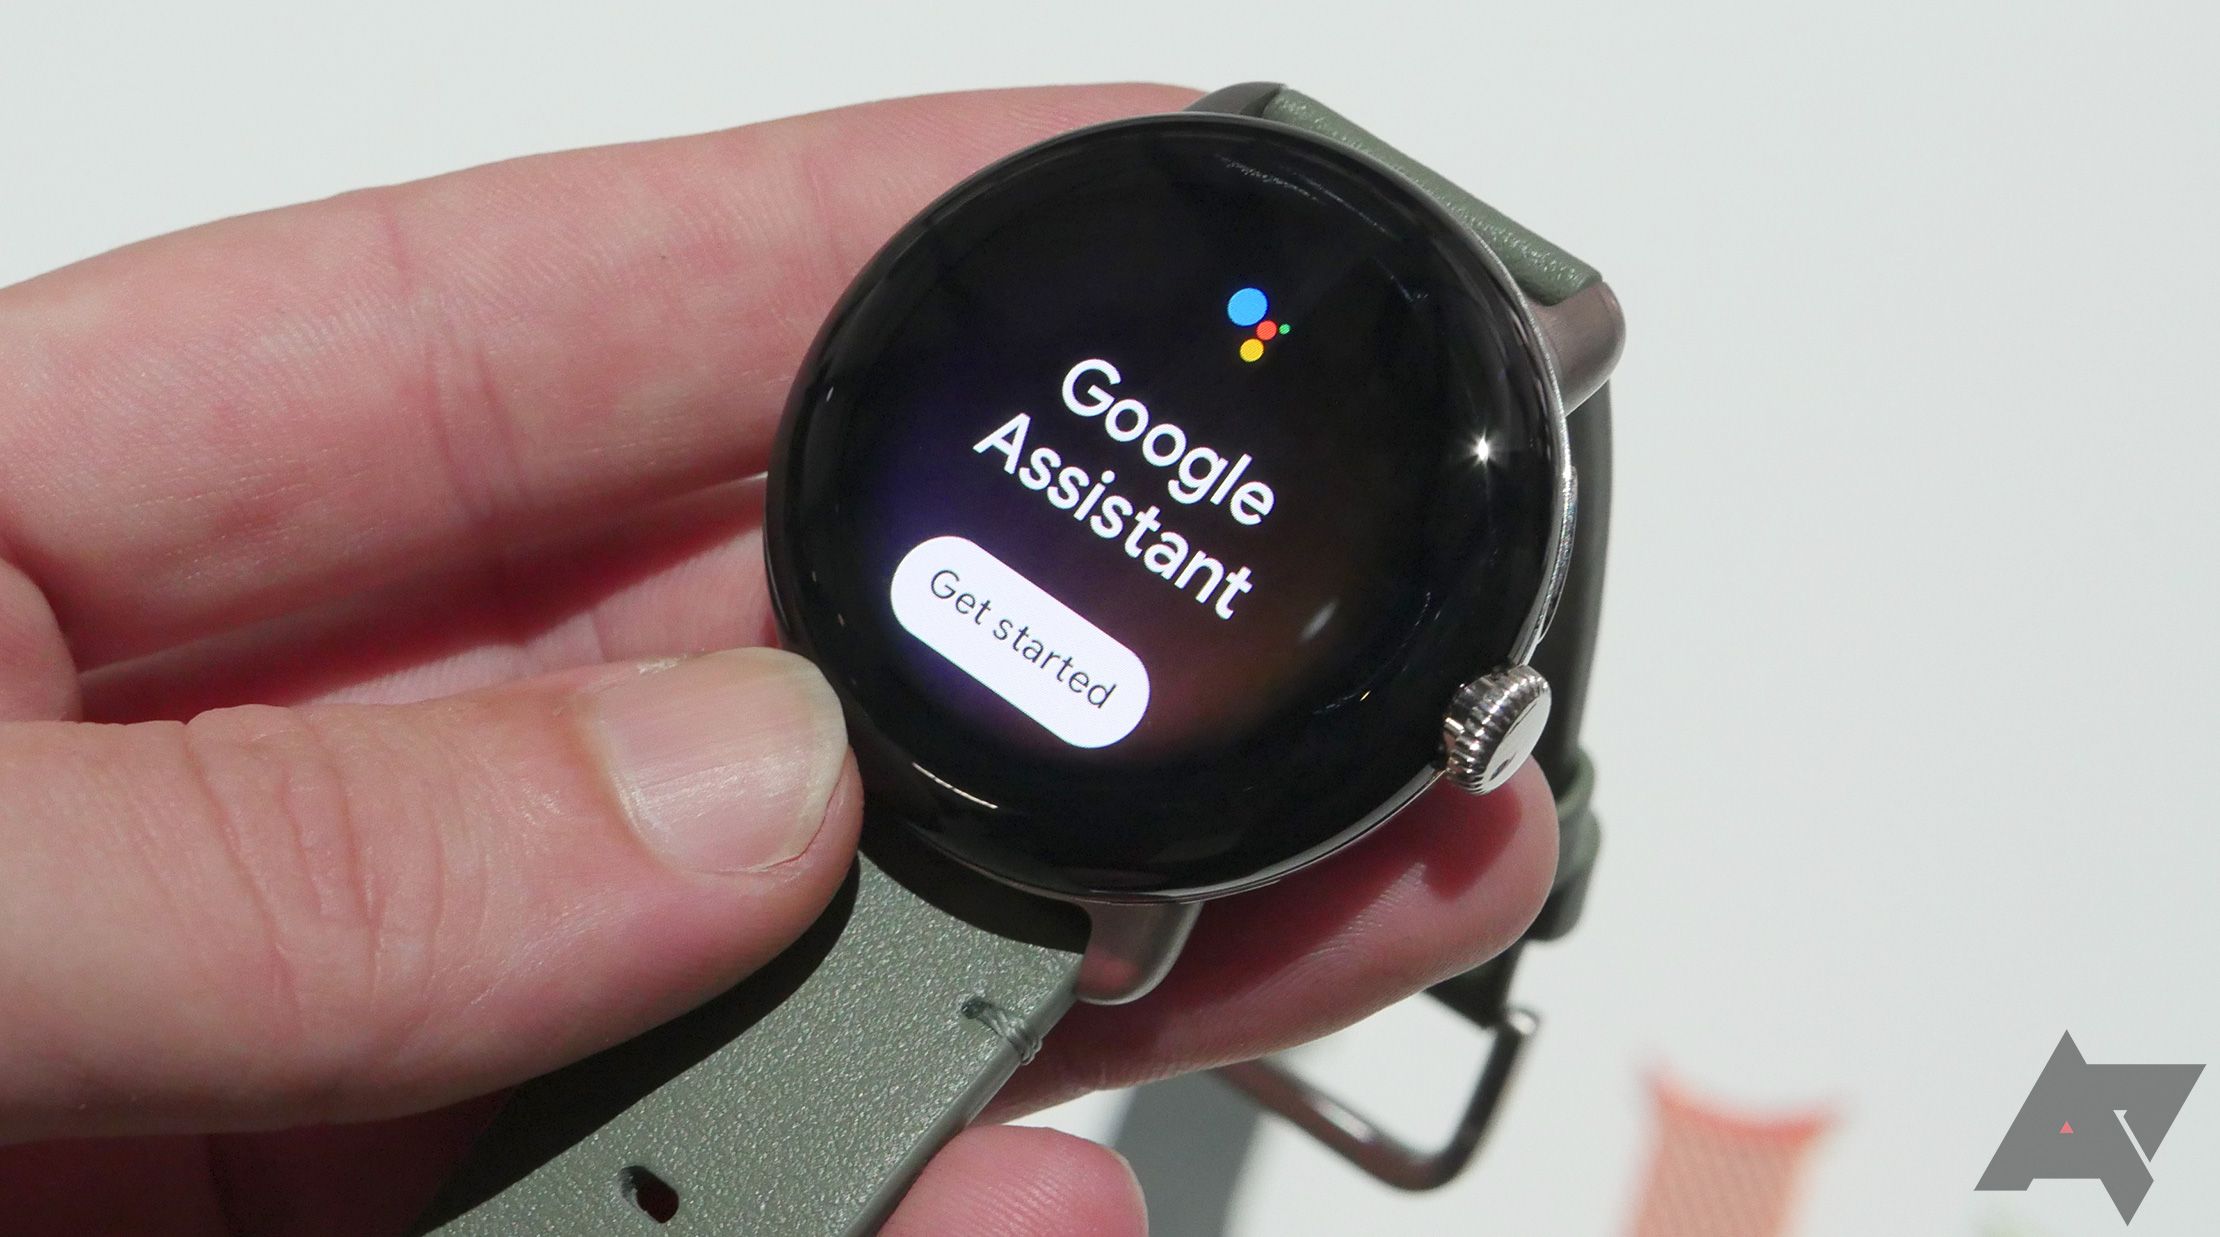 A hand holding a Google Pixel watch showing Google Assistant